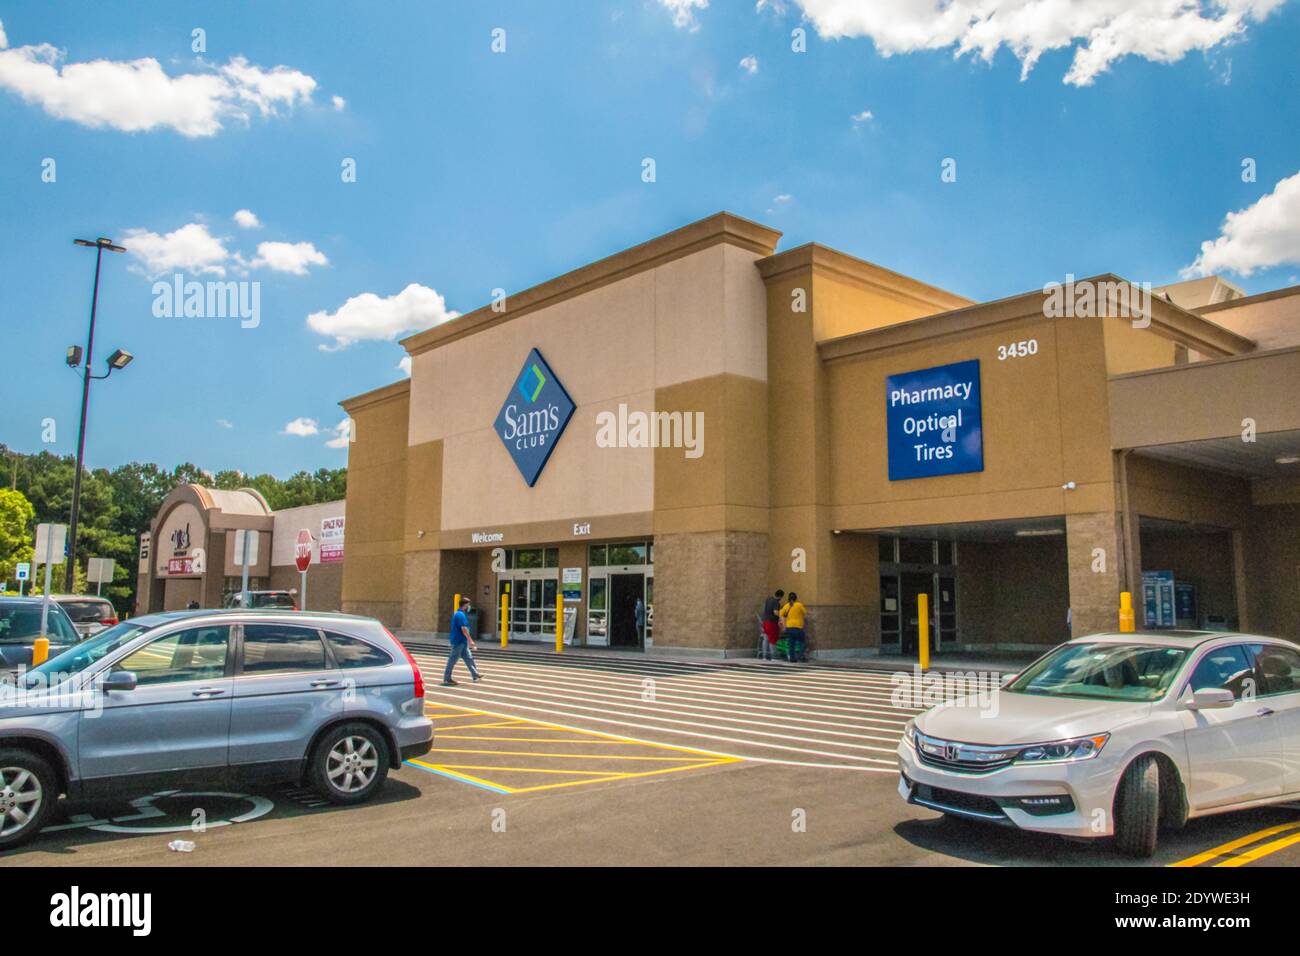 Gwinnett, County USA - 05 31 20: Sams Club building sign with people and cars Stock Photo